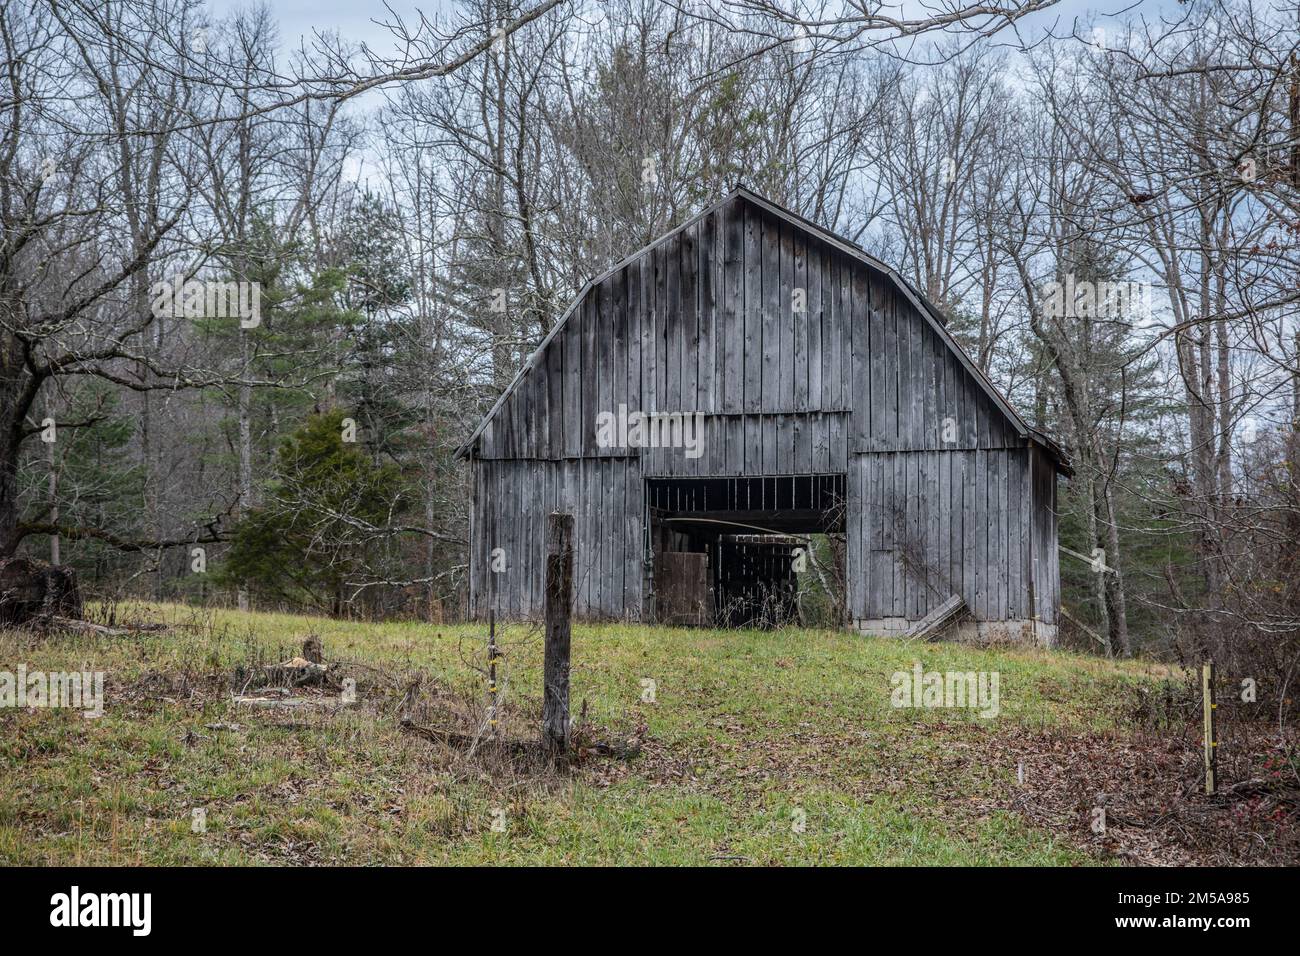 A rustic gray barn on a hillside surrounded by trees with an electrified fence at the entry to the barn on a cloudy day in wintertime Stock Photo